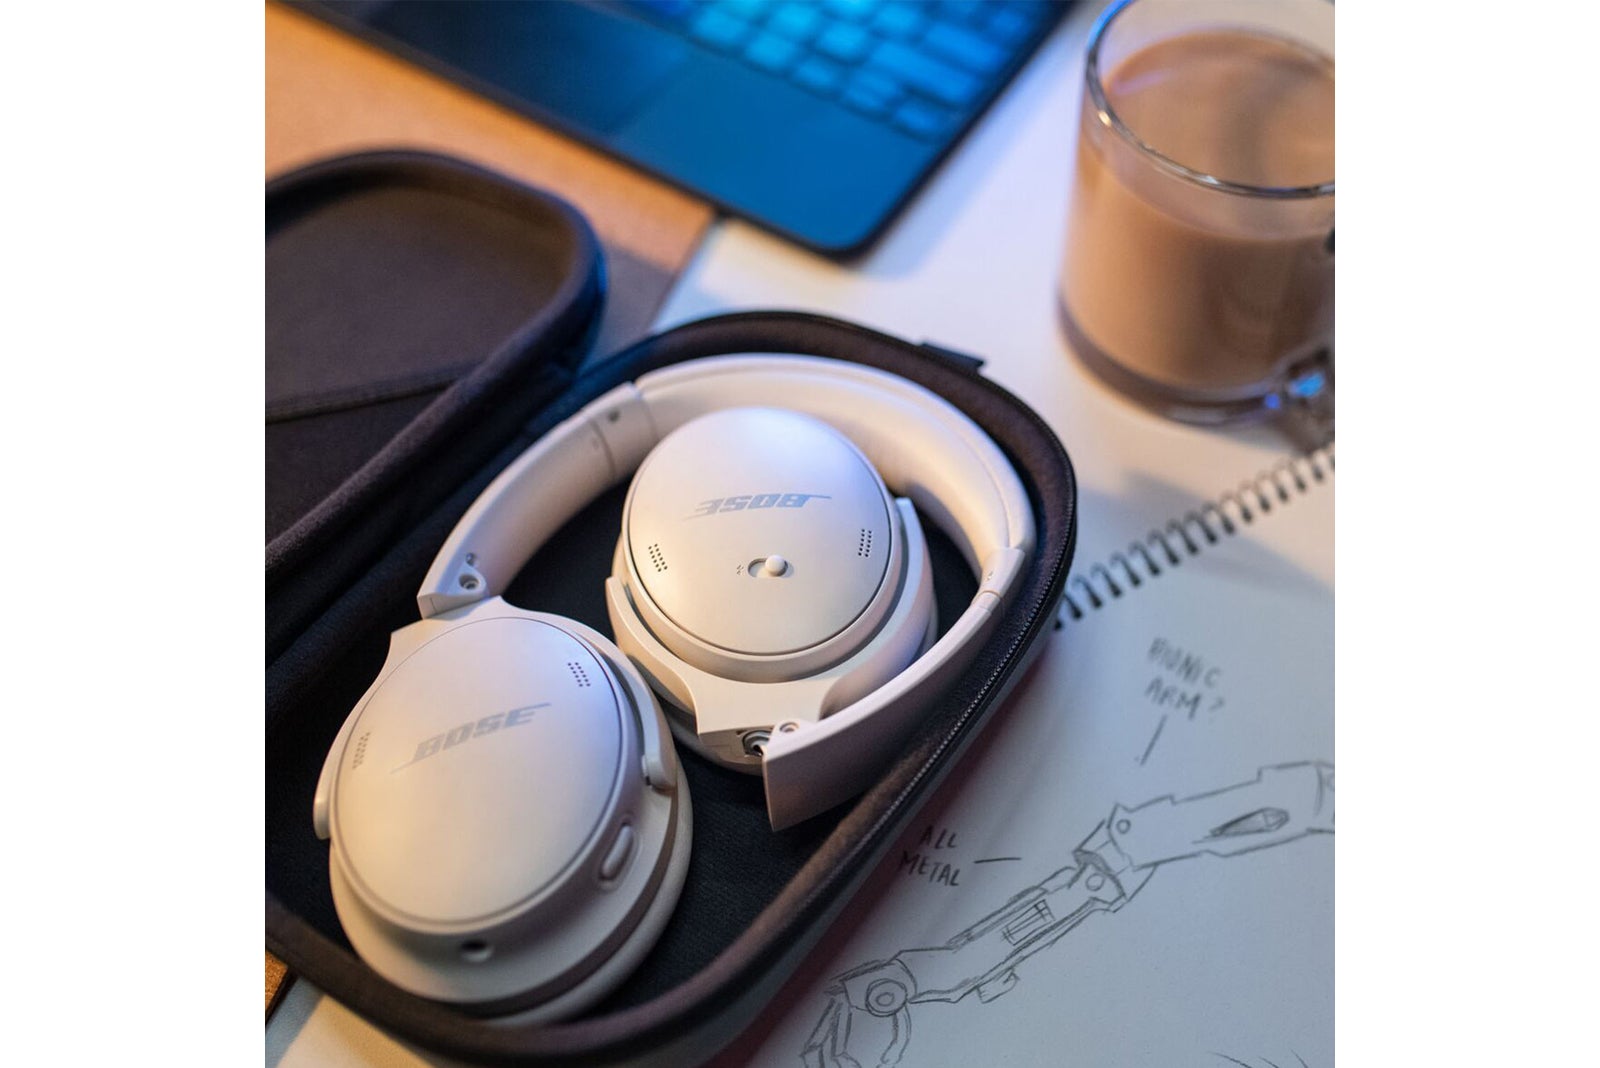 Bose QuietComfort 45 Noise-Cancelling Headphones are finally here!